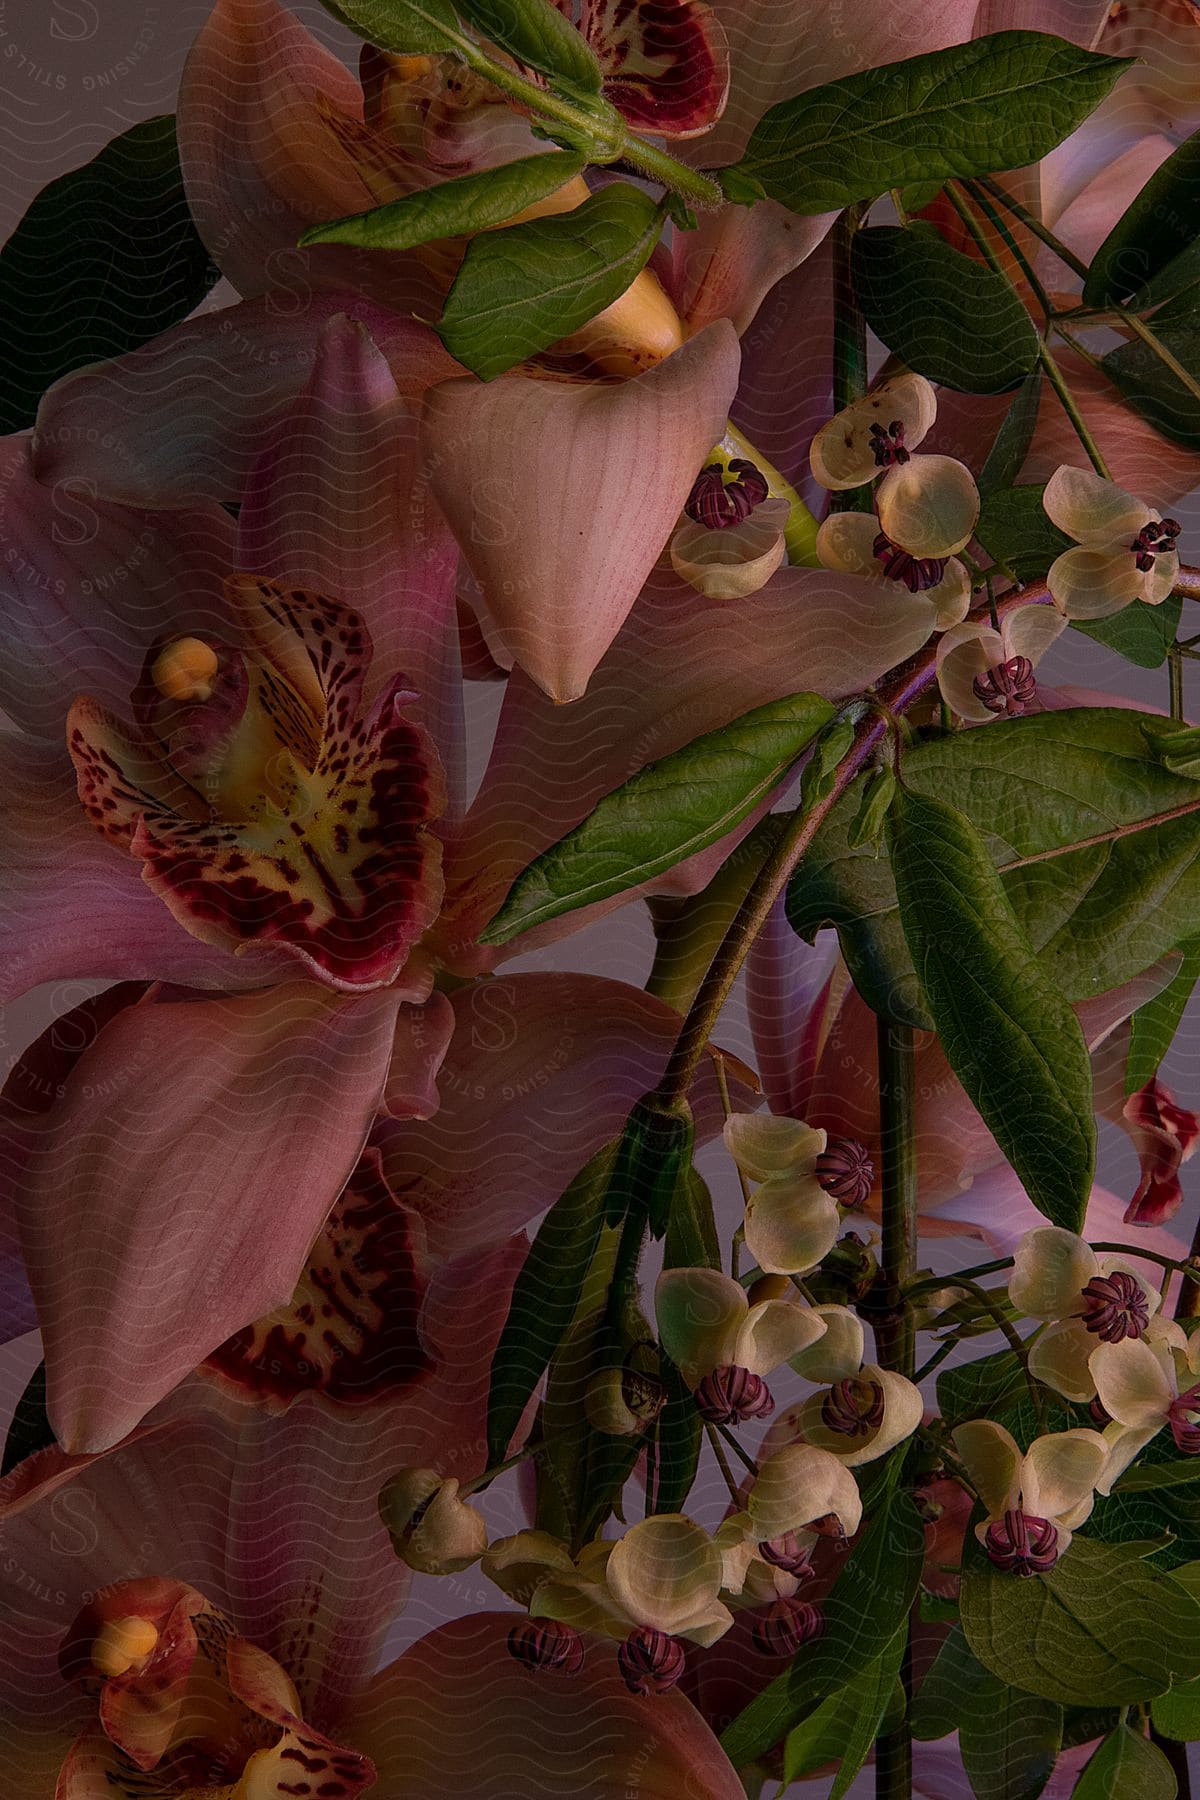 Variety of flowers and leaves with emphasis on pink orchids.